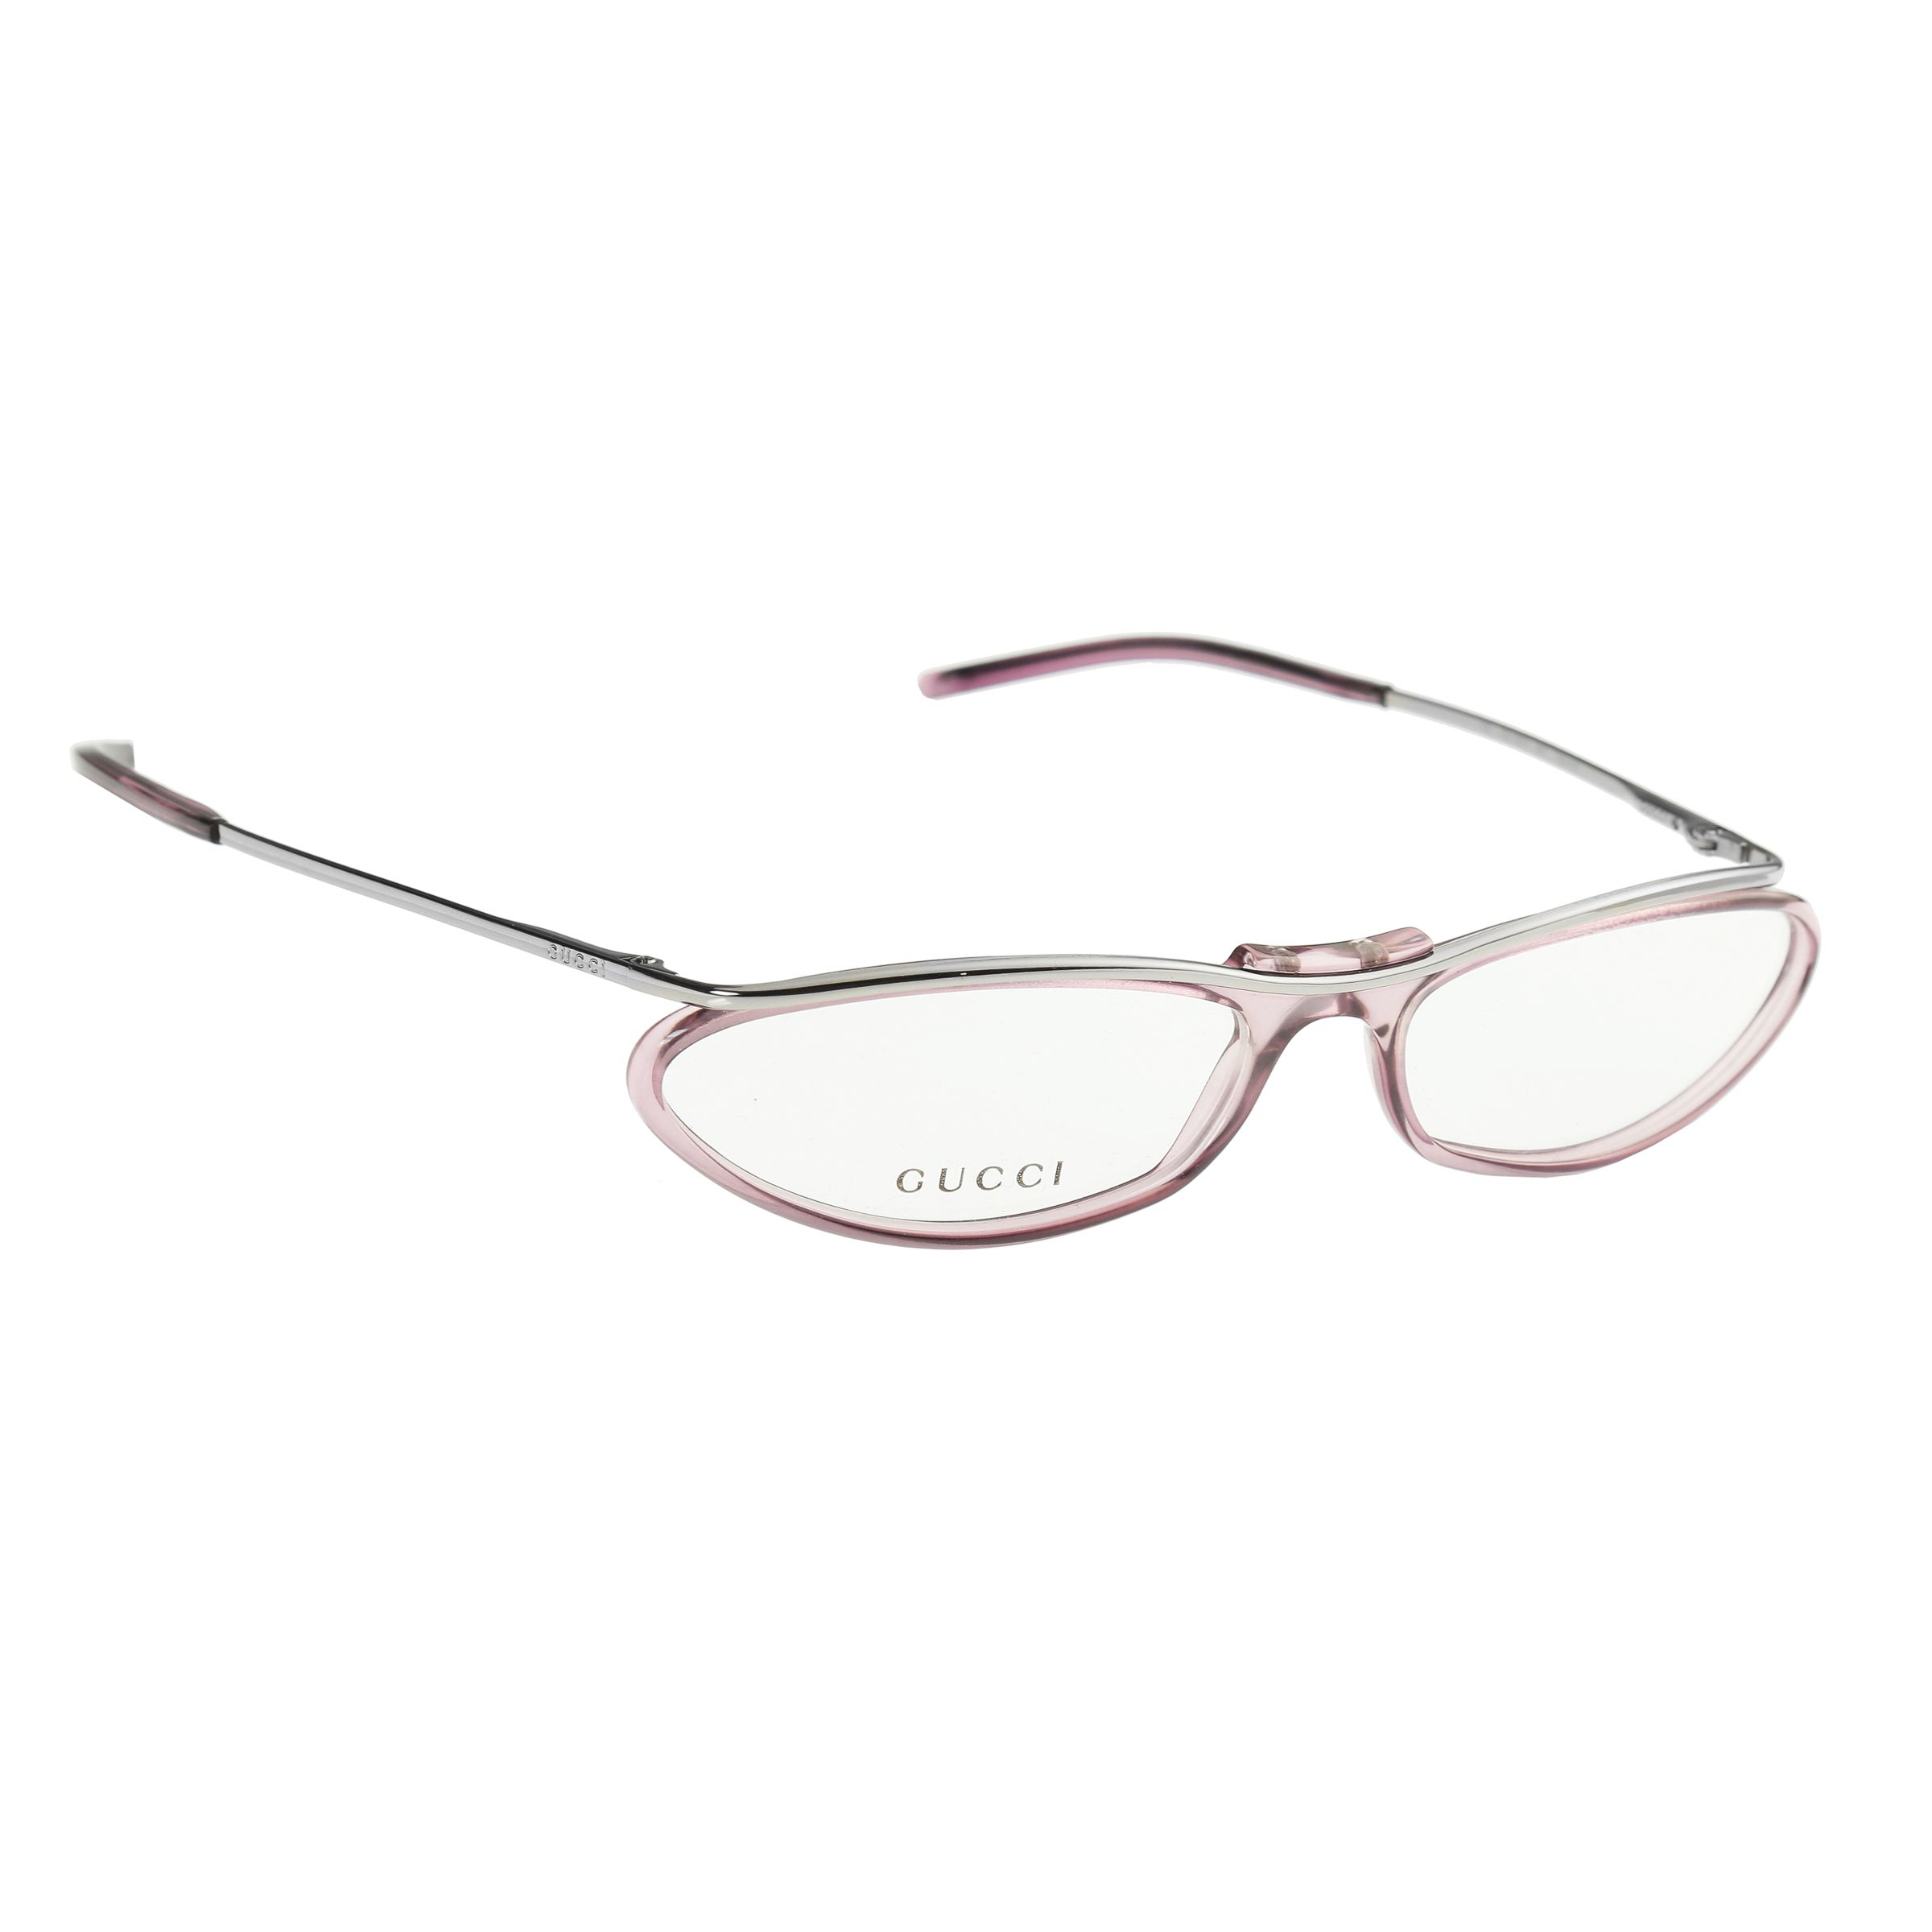 Pre-owned Archival Clothing X Gucci '90s Pink Plastic Frame Glasses